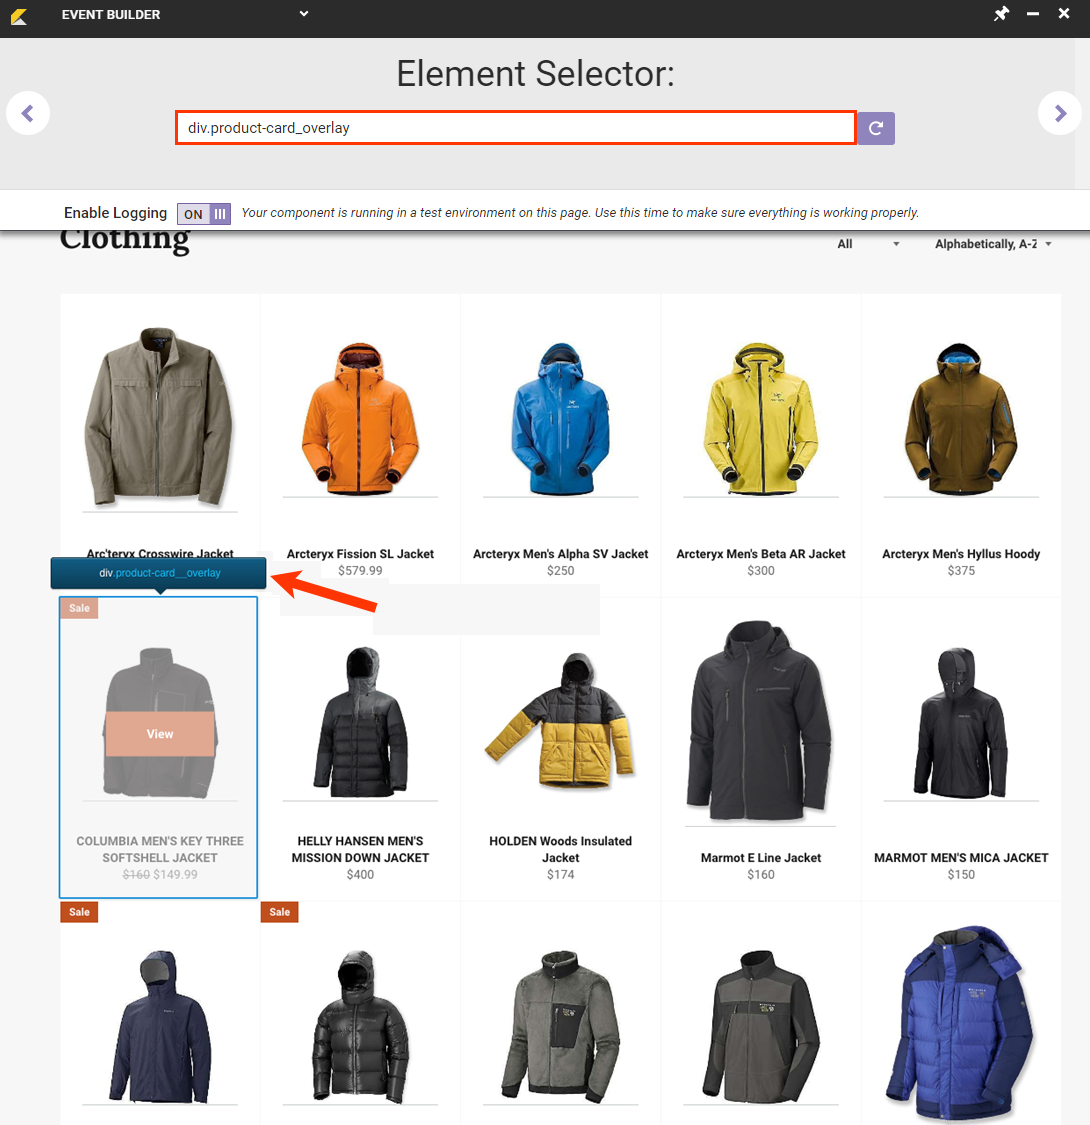 View of the Element Selector tool in Event Builder